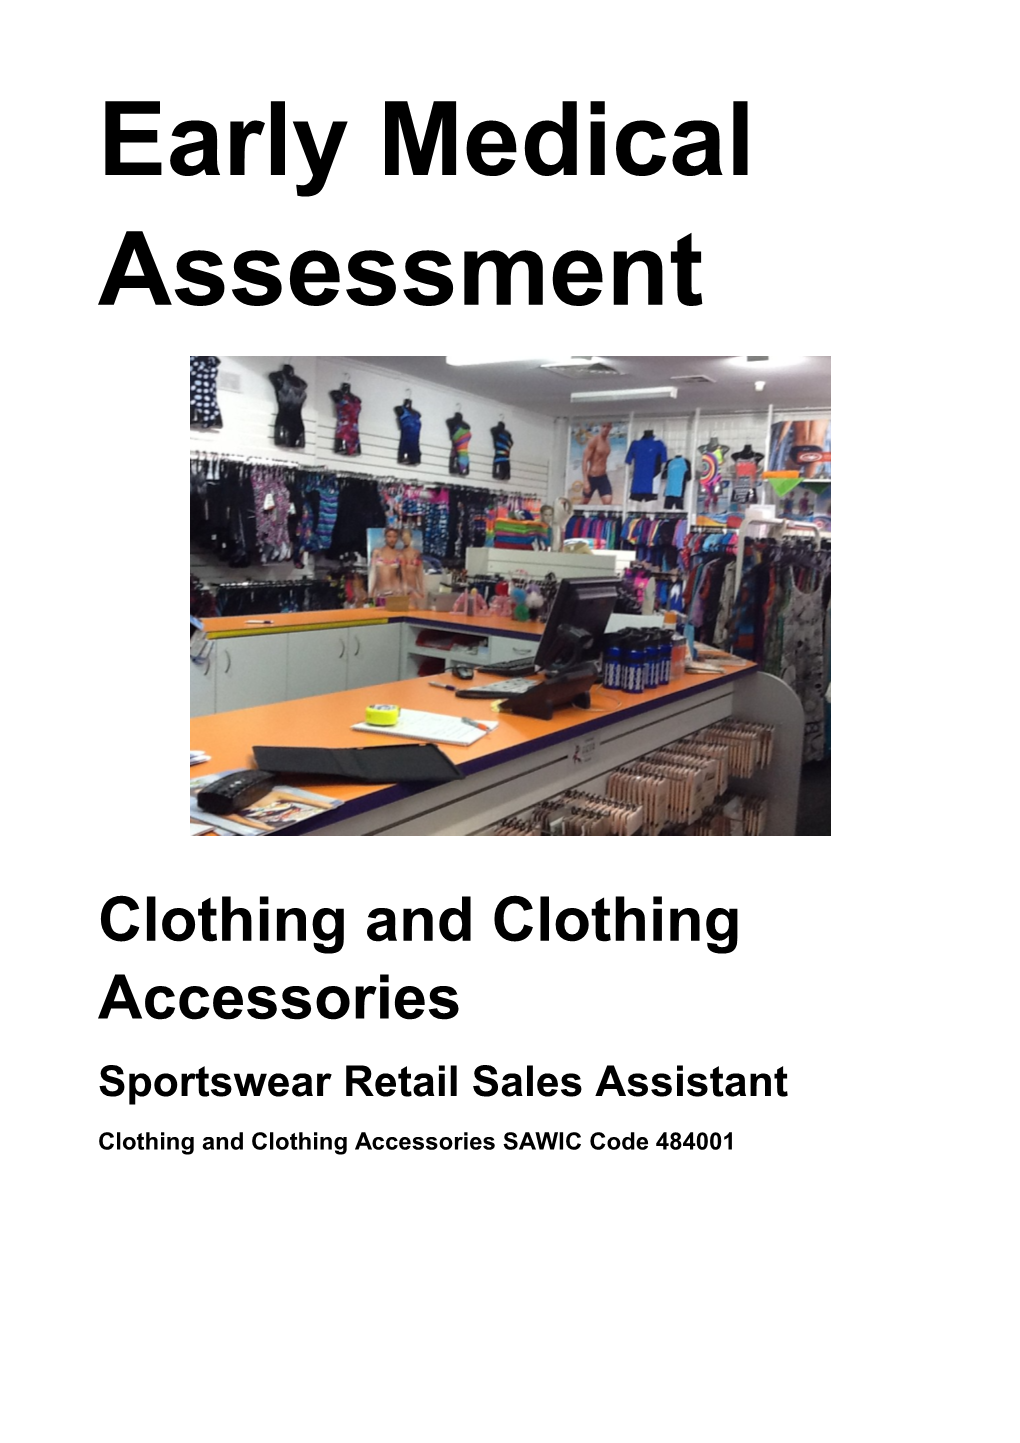 Clothing and Clothing Accessories Retailing - Sales Assistant - Sportswear